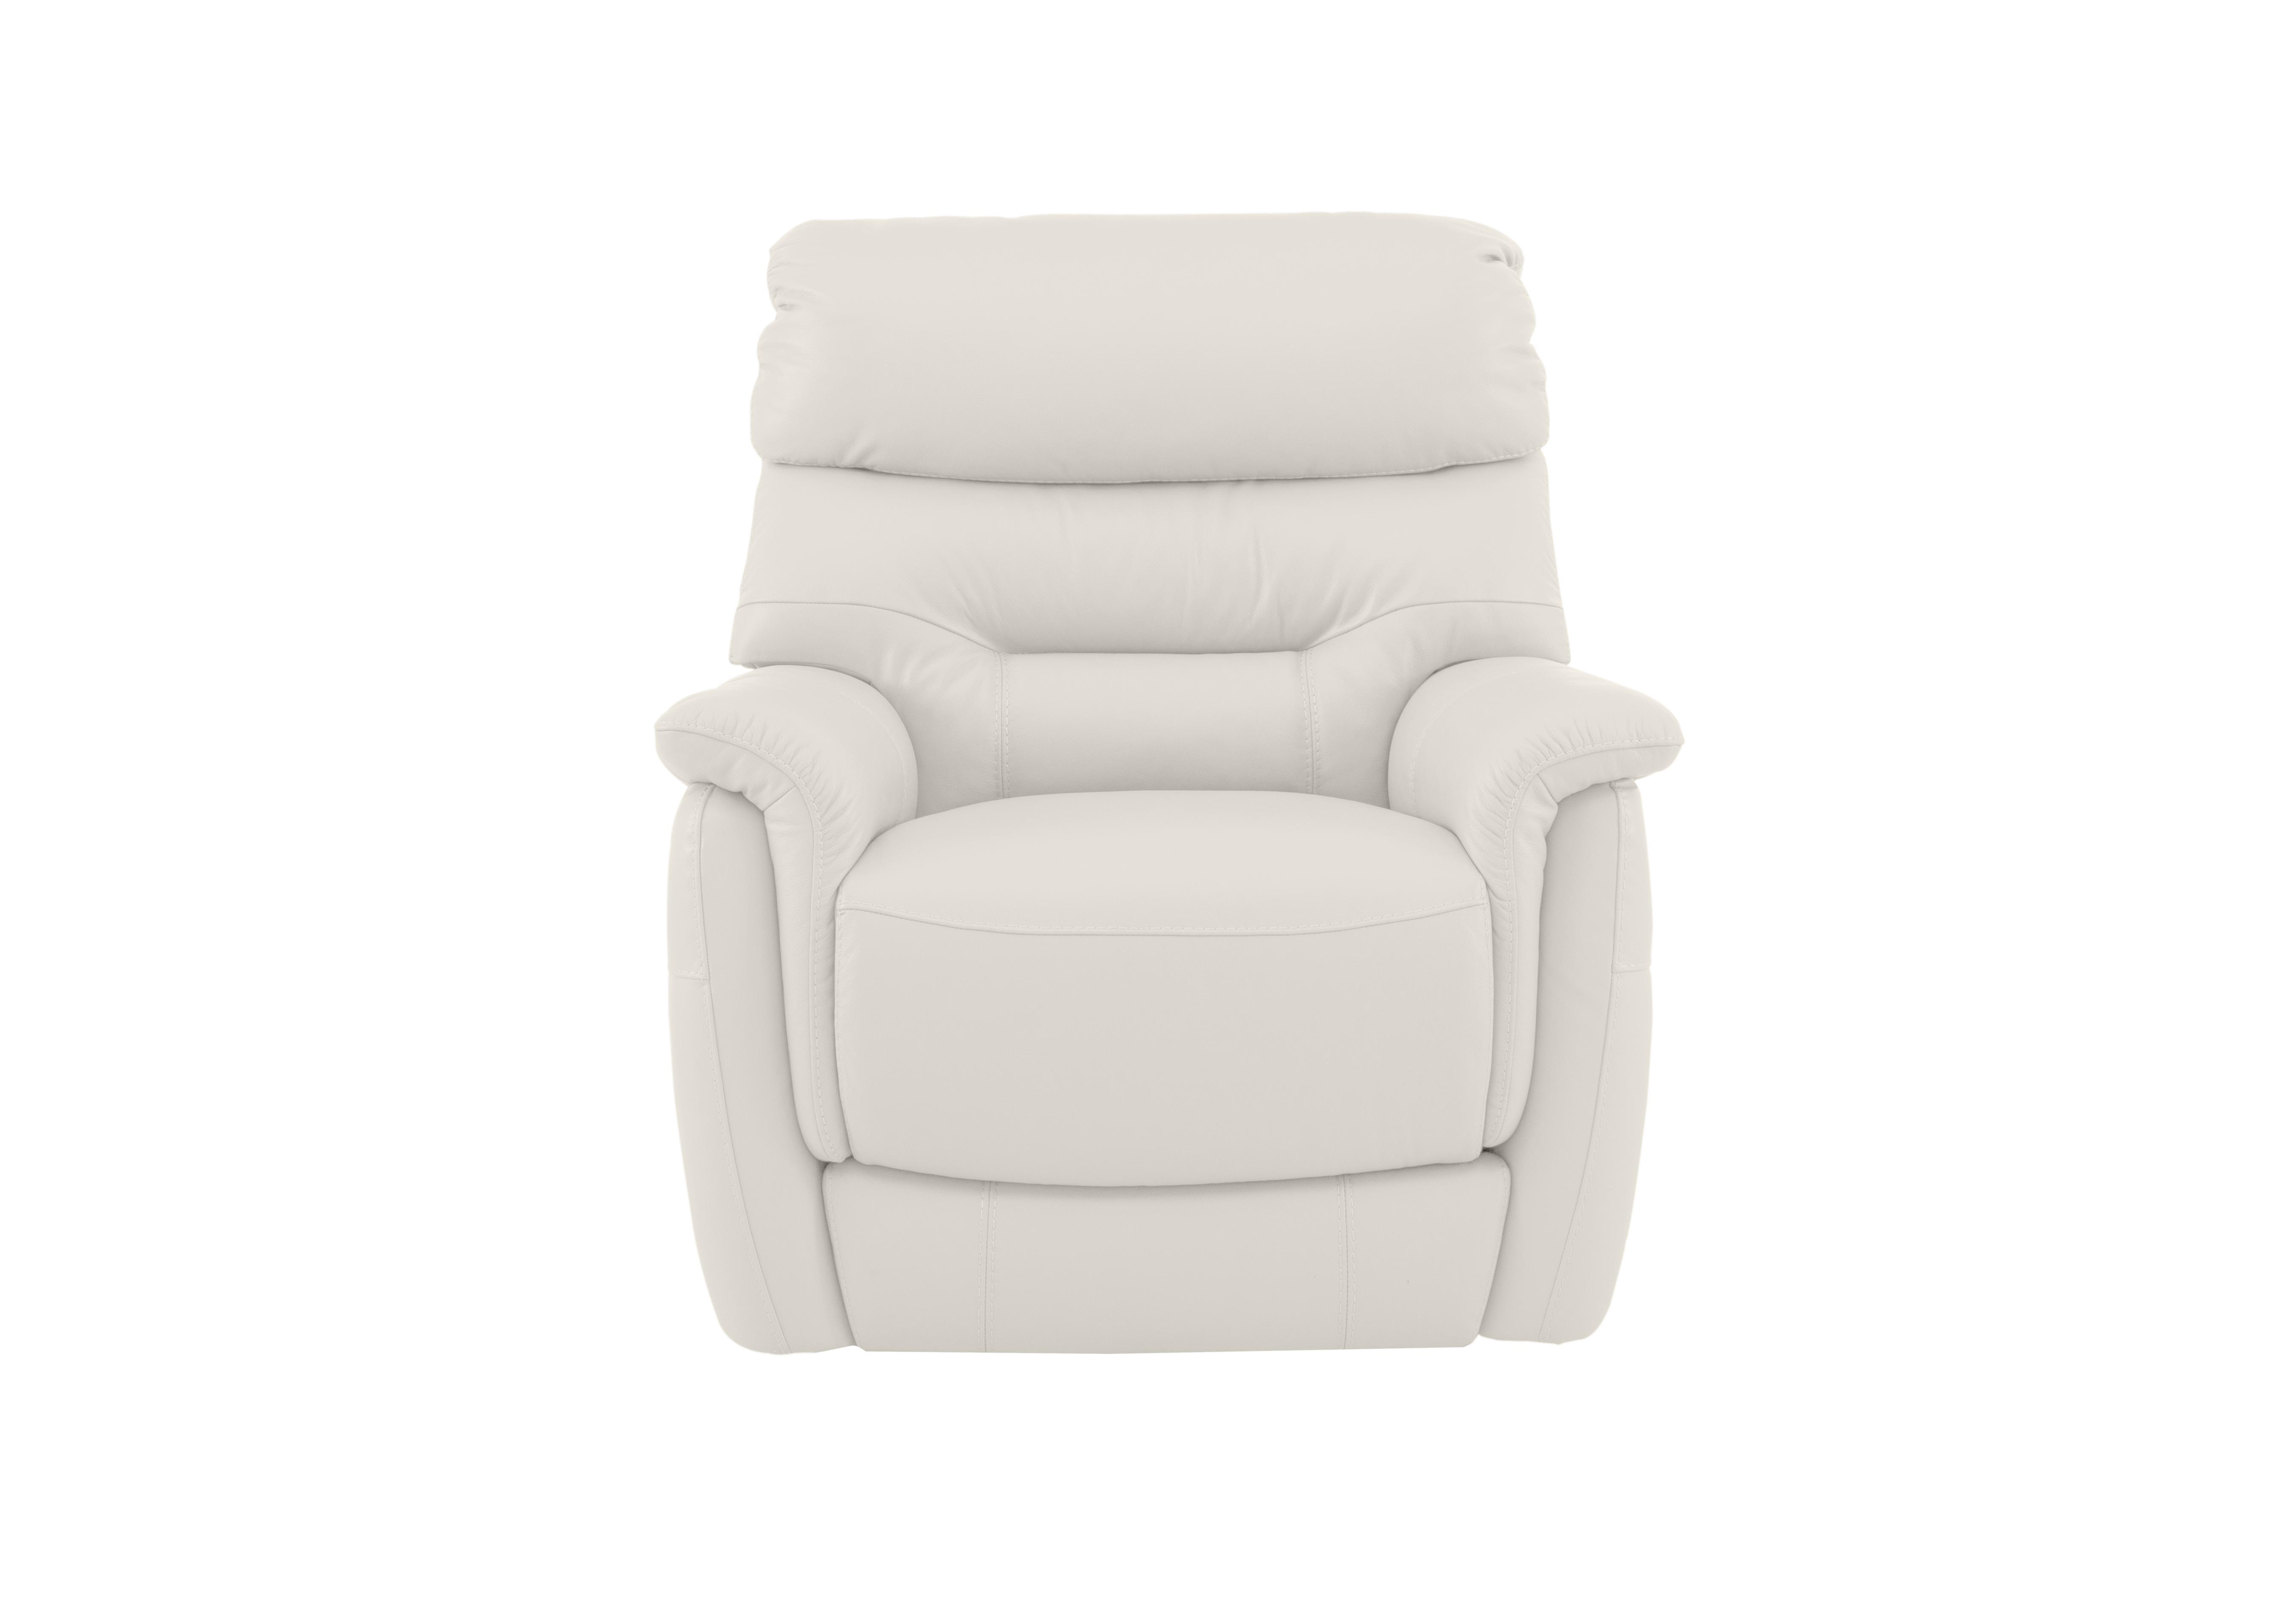 Chicago Leather Armchair in Bv-744d Star White on Furniture Village